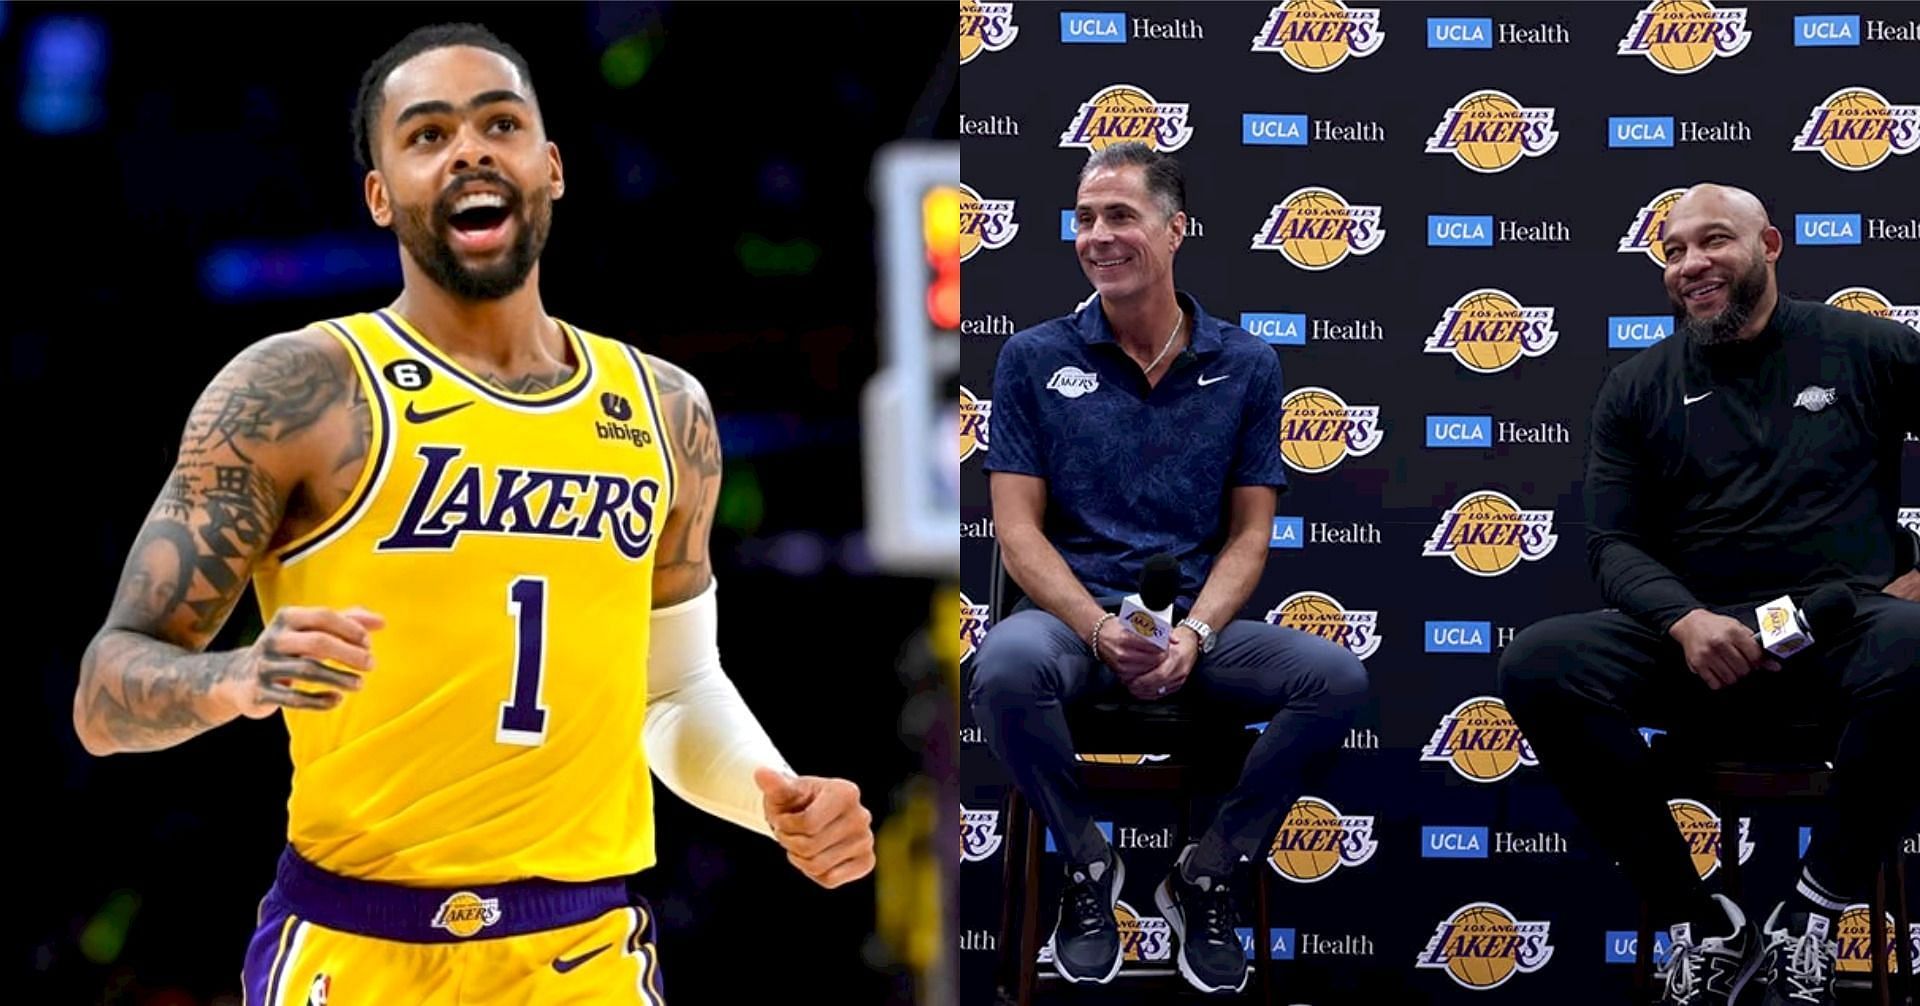 LA Lakers point guard D&rsquo;Angelo Russell, Lakers GM Rob Pelinka and Lakers coach Darvin Ham